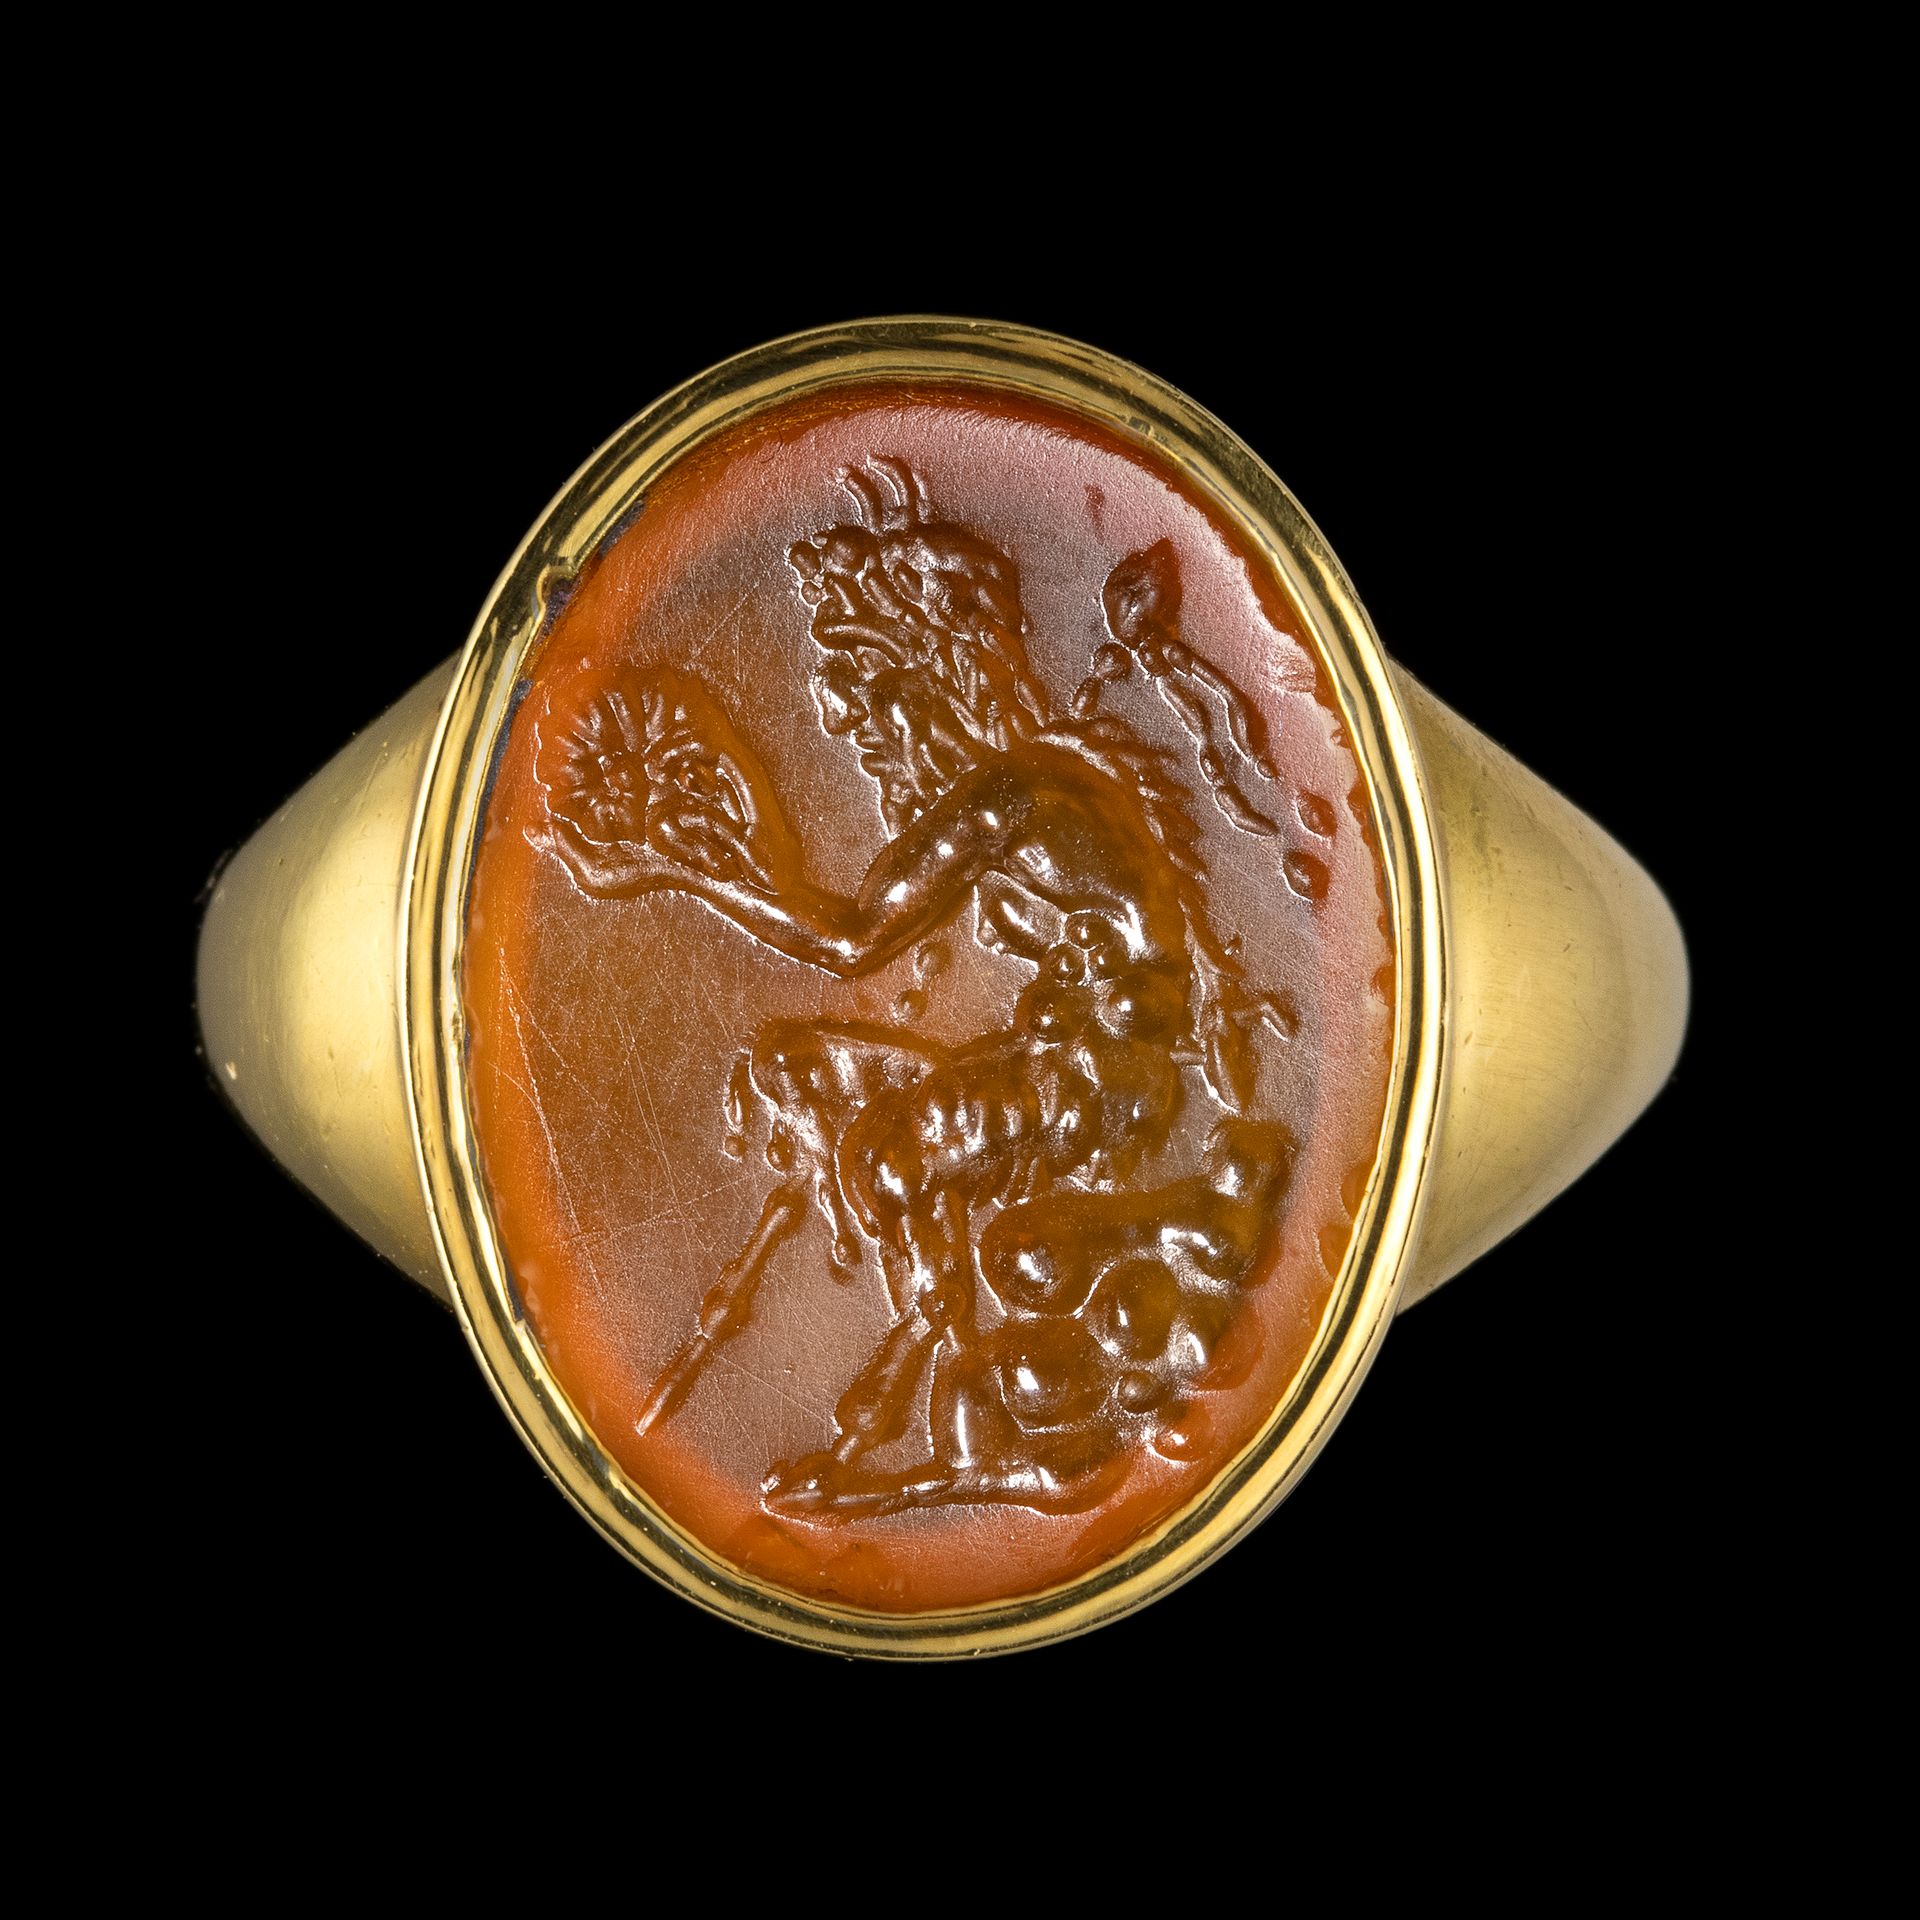 Null RING
18 ct gold and set with an intaglio on cornelian figuring a satyr sitt&hellip;